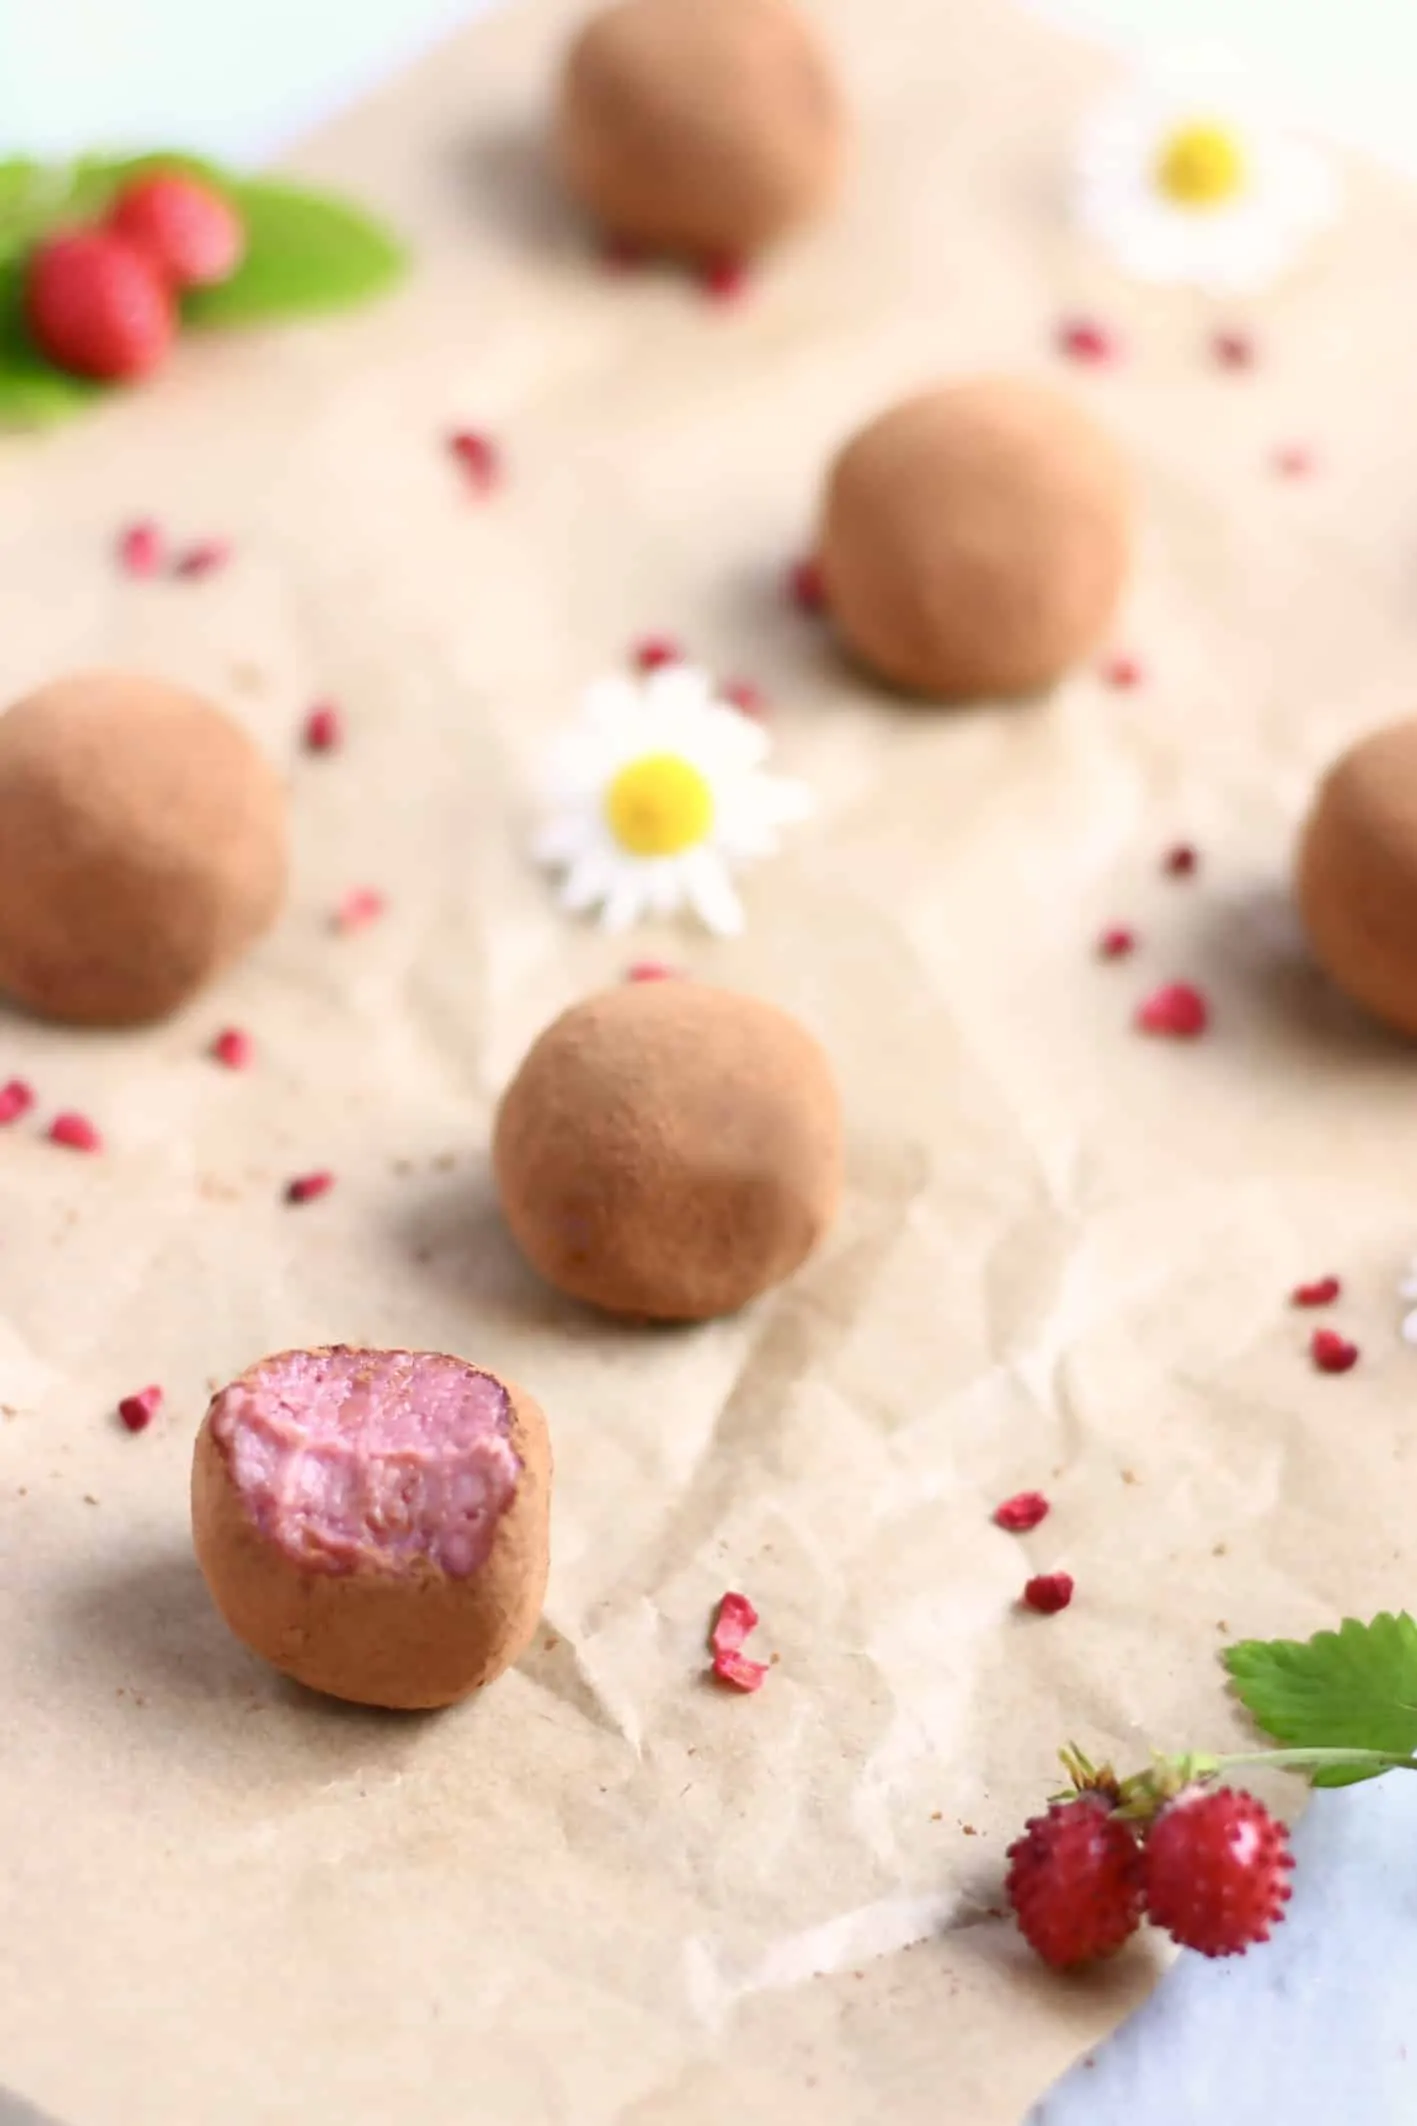 Six strawberry truffles covered in cocoa powder with a mouthful taken out of one